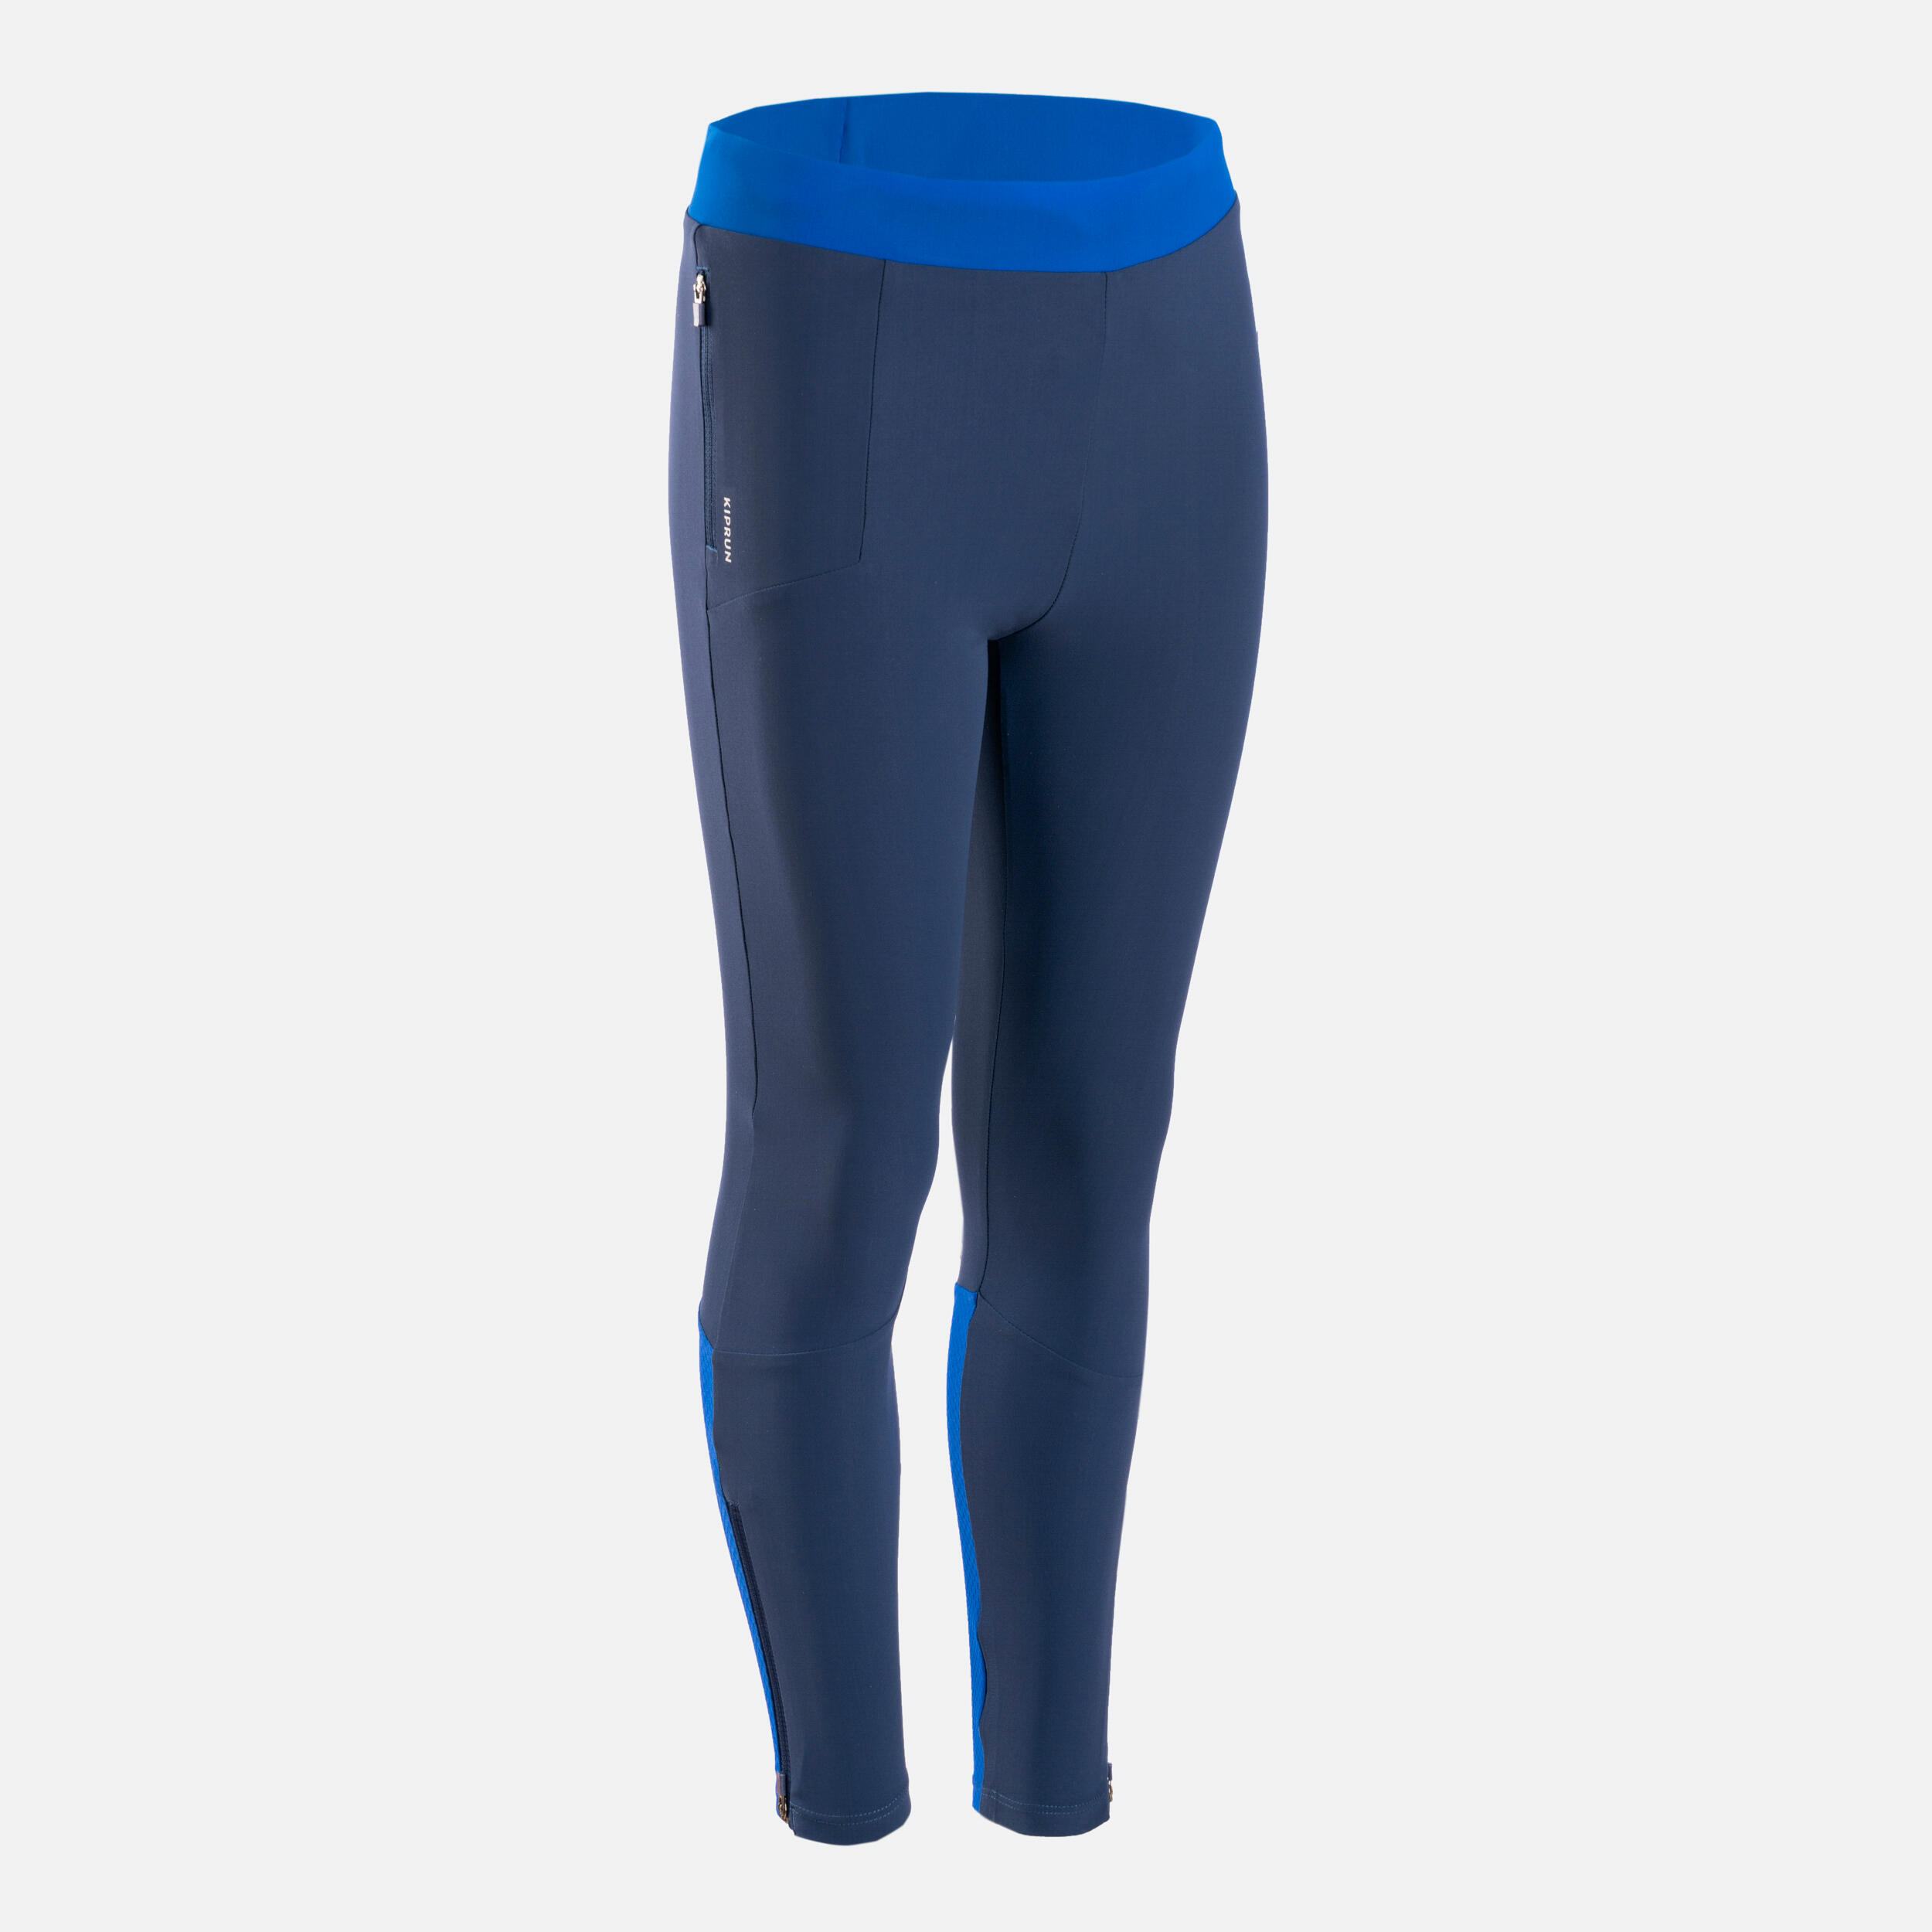 KIDS' RUNNING TIGHTS - KIPRUN DRY+ NAVY BLUE AND ELECTRIC BLUE 1/13